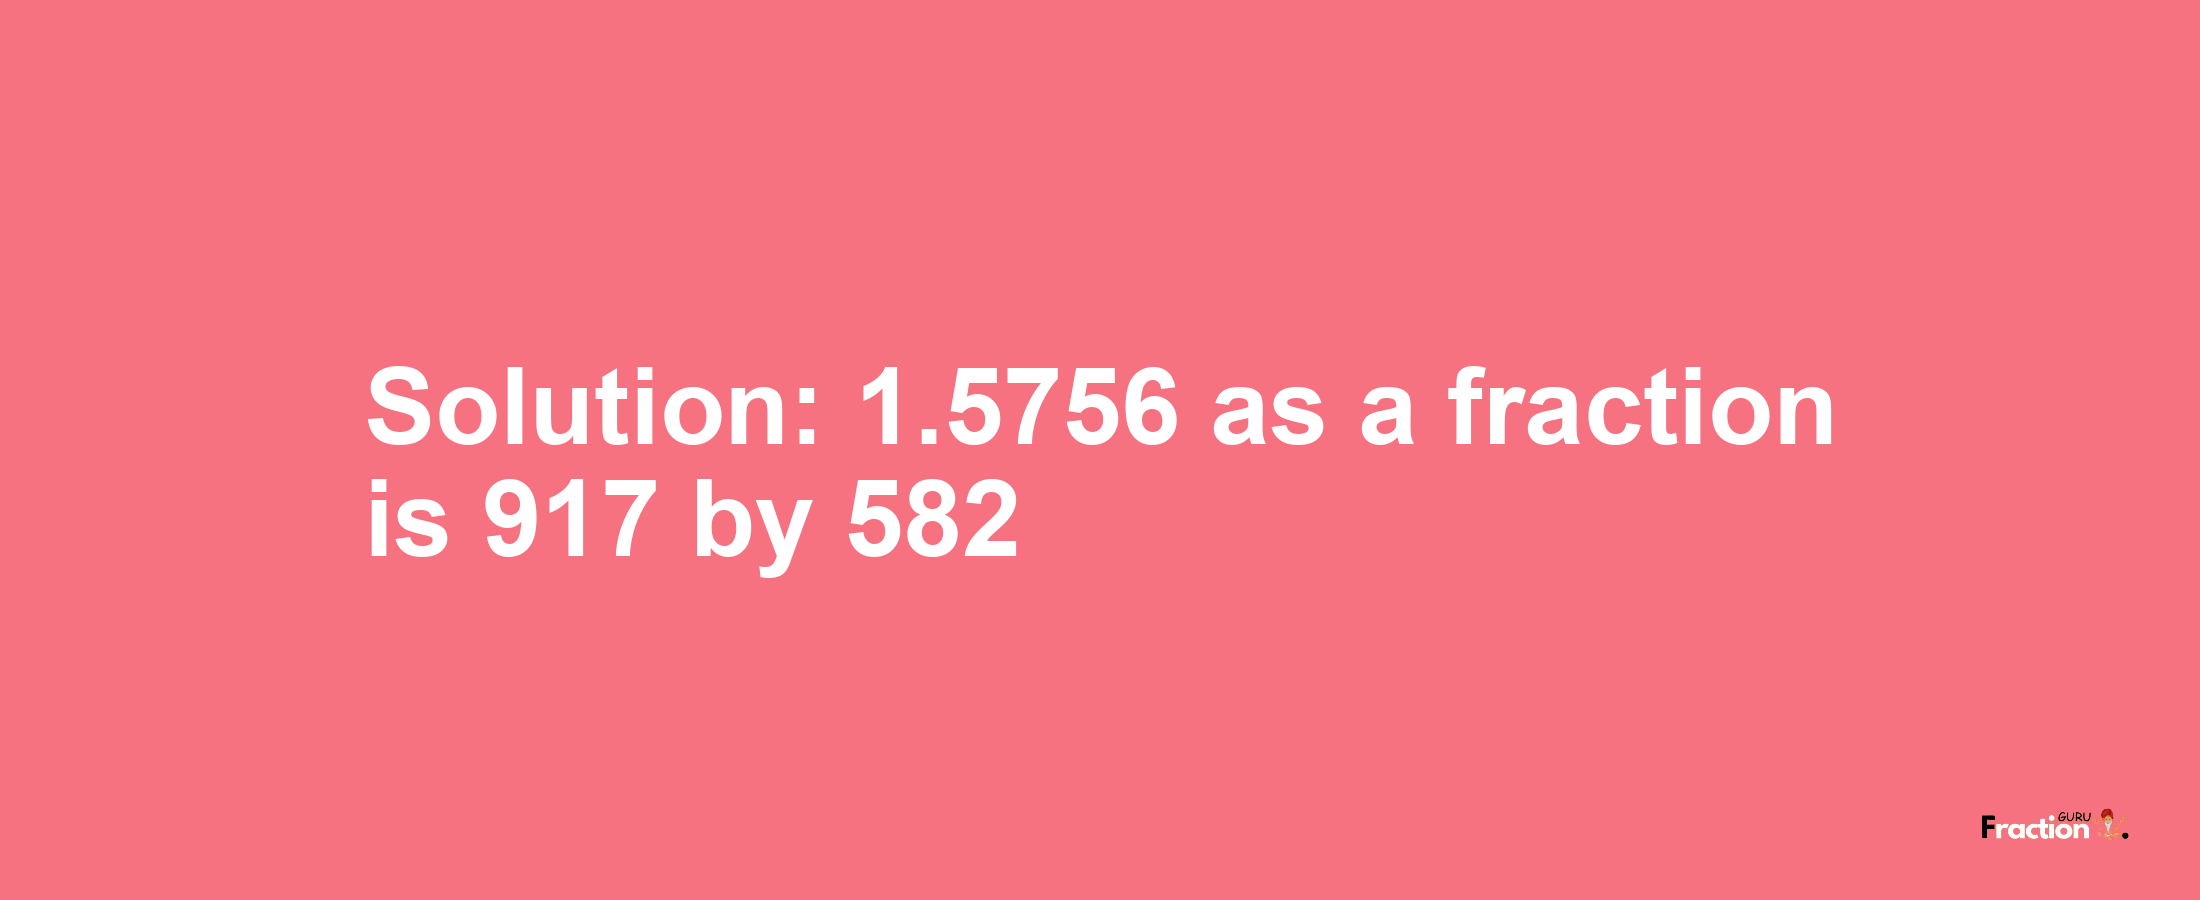 Solution:1.5756 as a fraction is 917/582